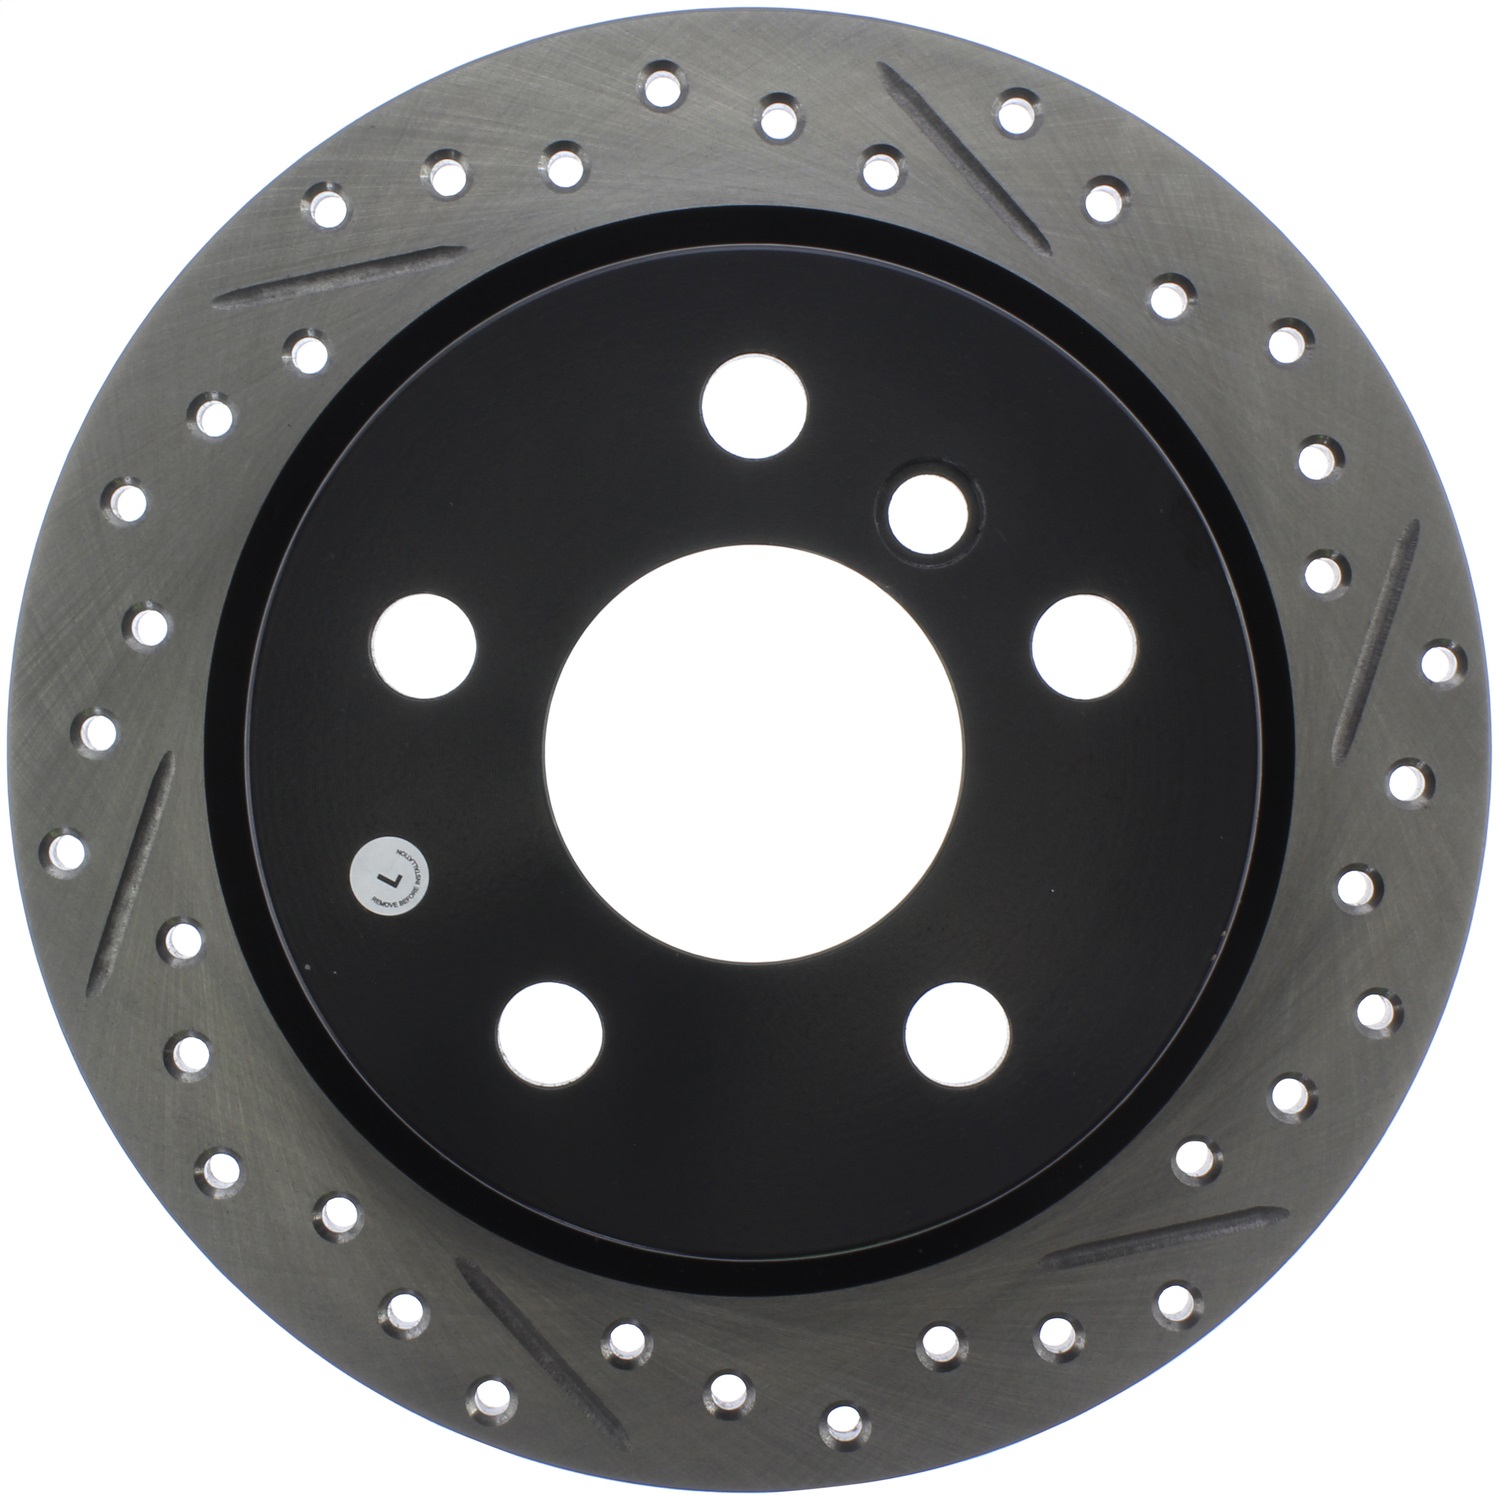 StopTech 127.34159L Sport Cross-Drilled And Slotted Disc Brake Rotor Fits Cooper